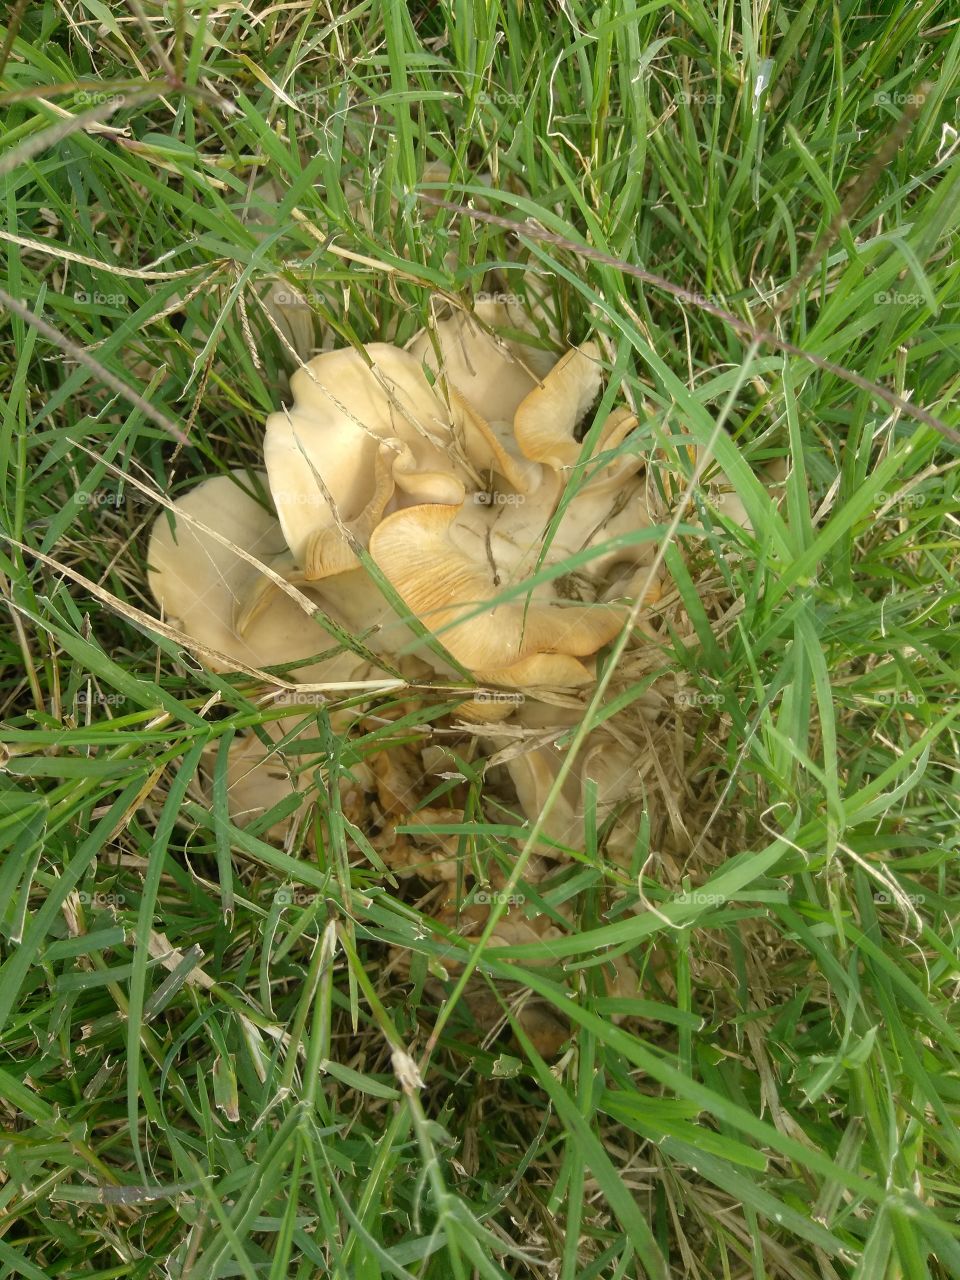 extremely interesting mushrooms growing in the pasture